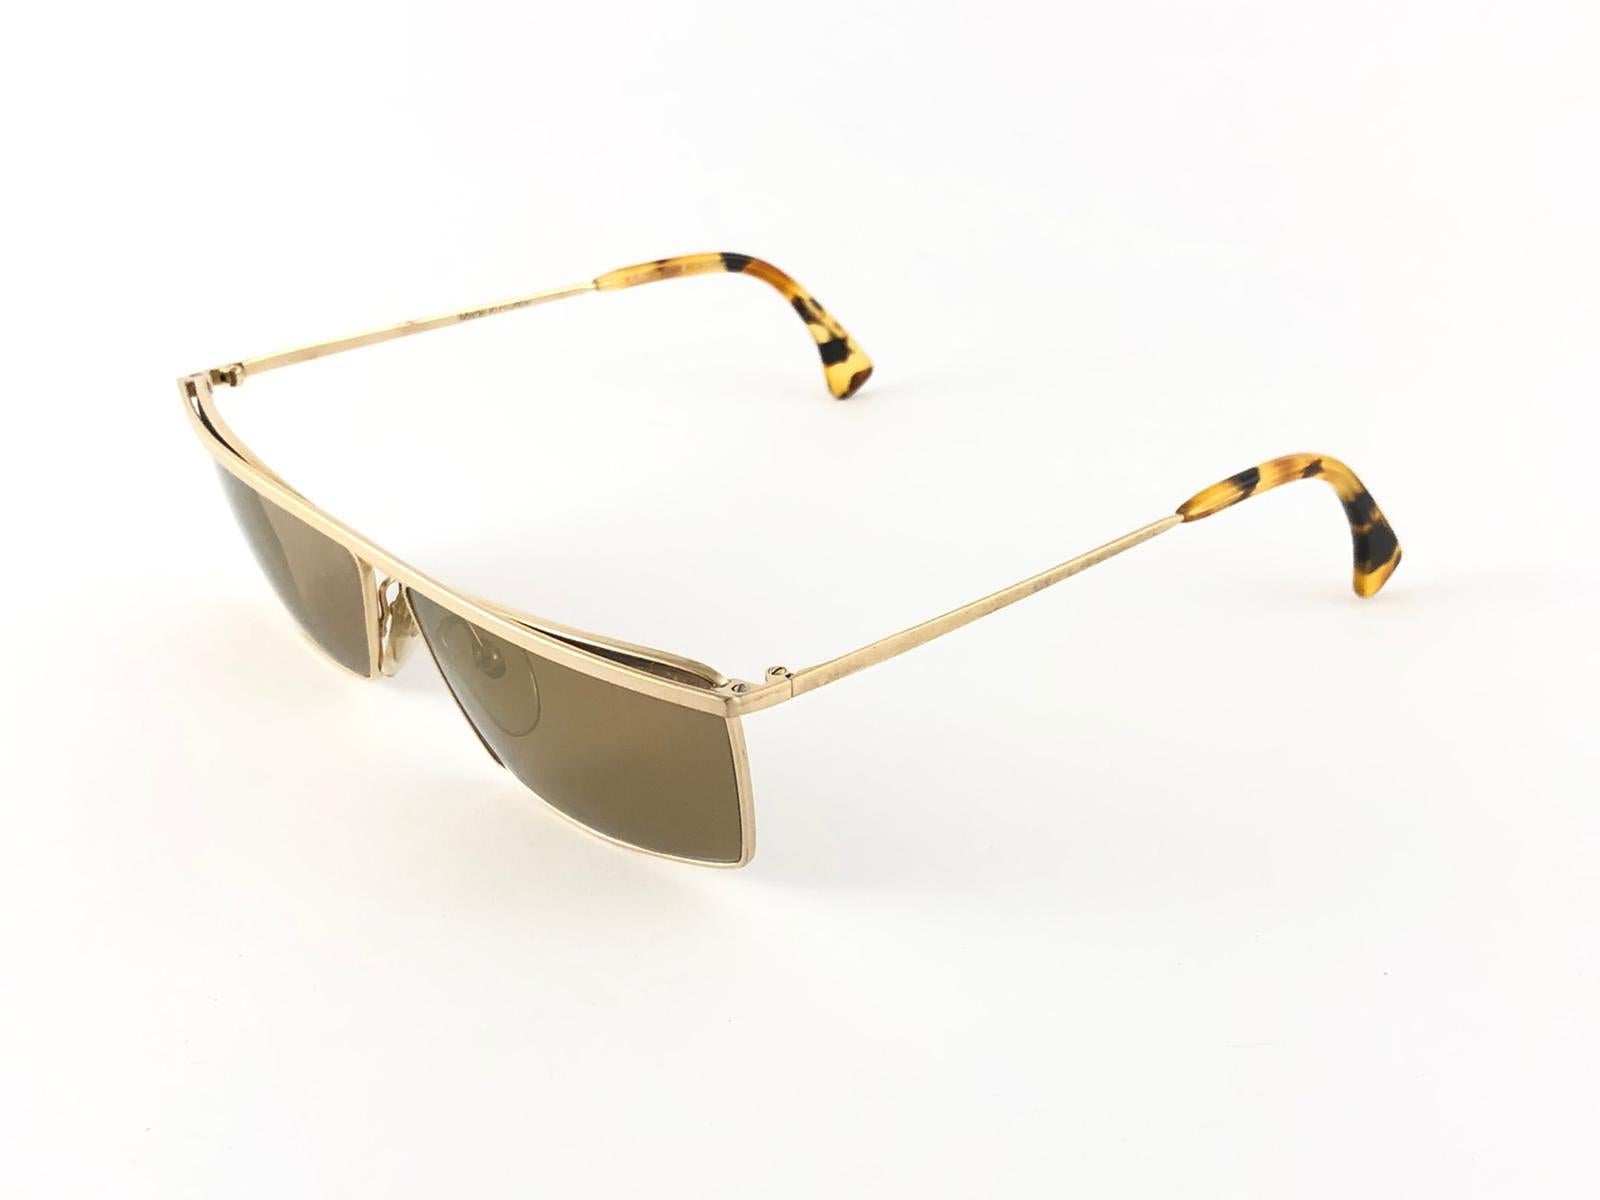 New Vintage Rare Alain Mikli  663 Gold Mask Sunglasses 1990 In New Condition For Sale In Baleares, Baleares